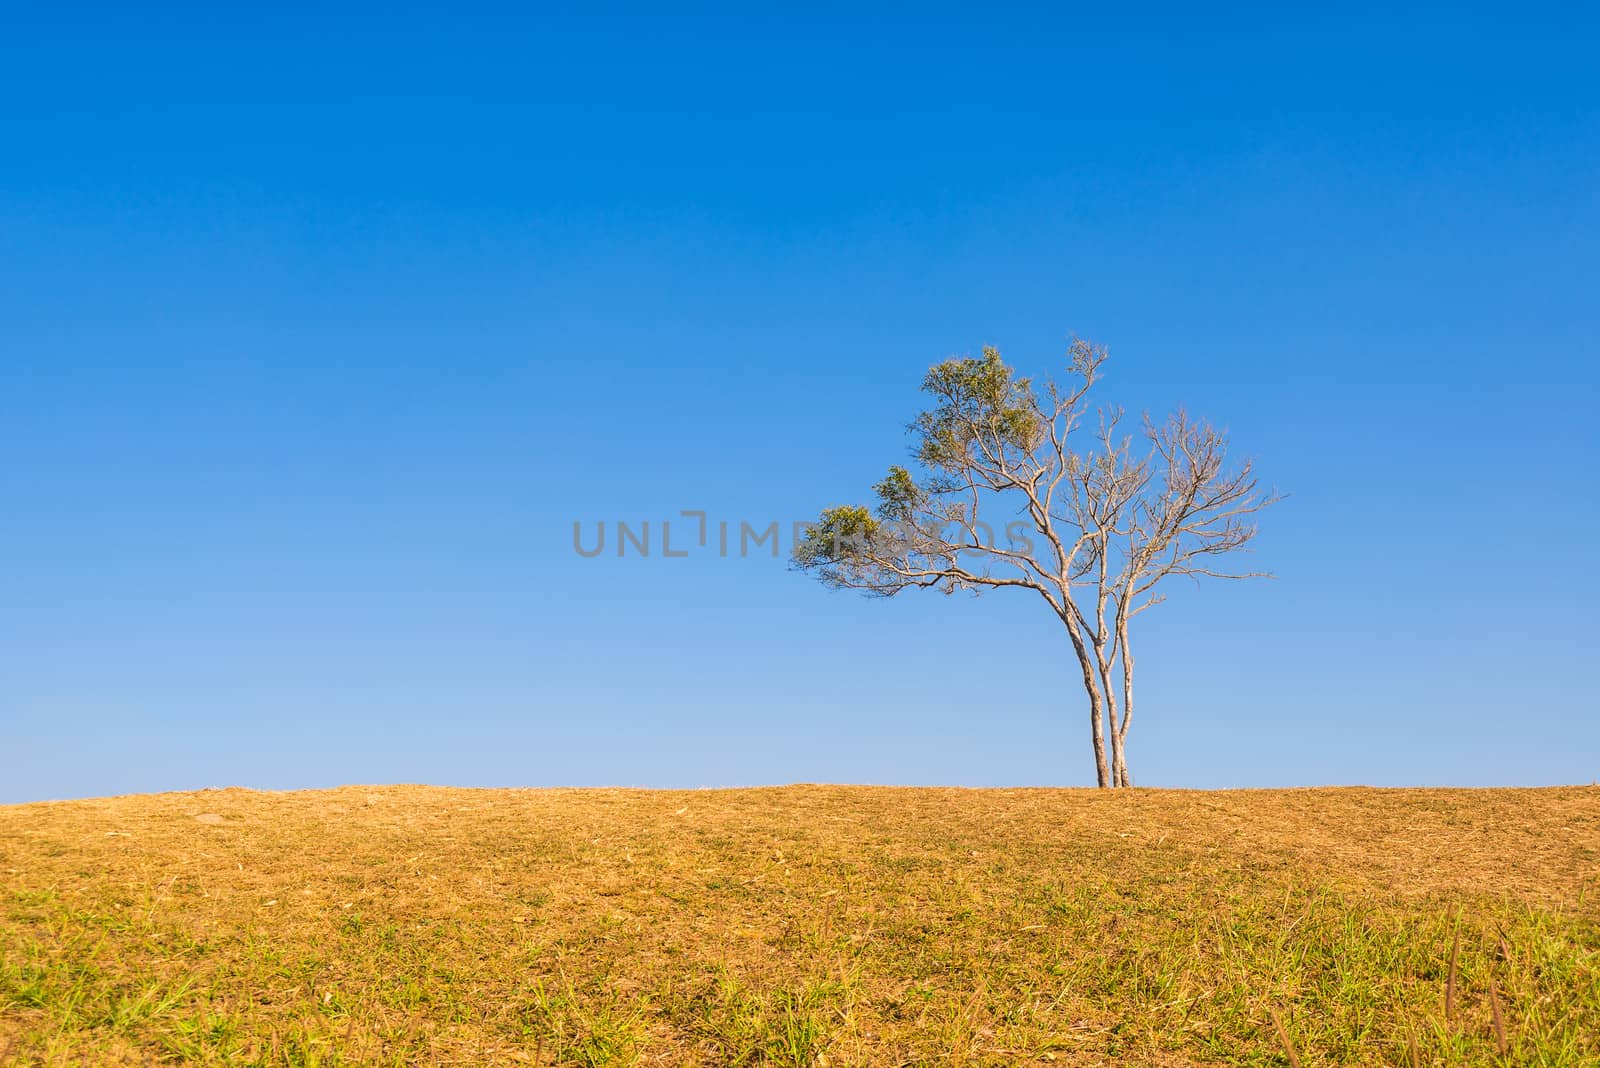 tree on hill with blue sky by moggara12